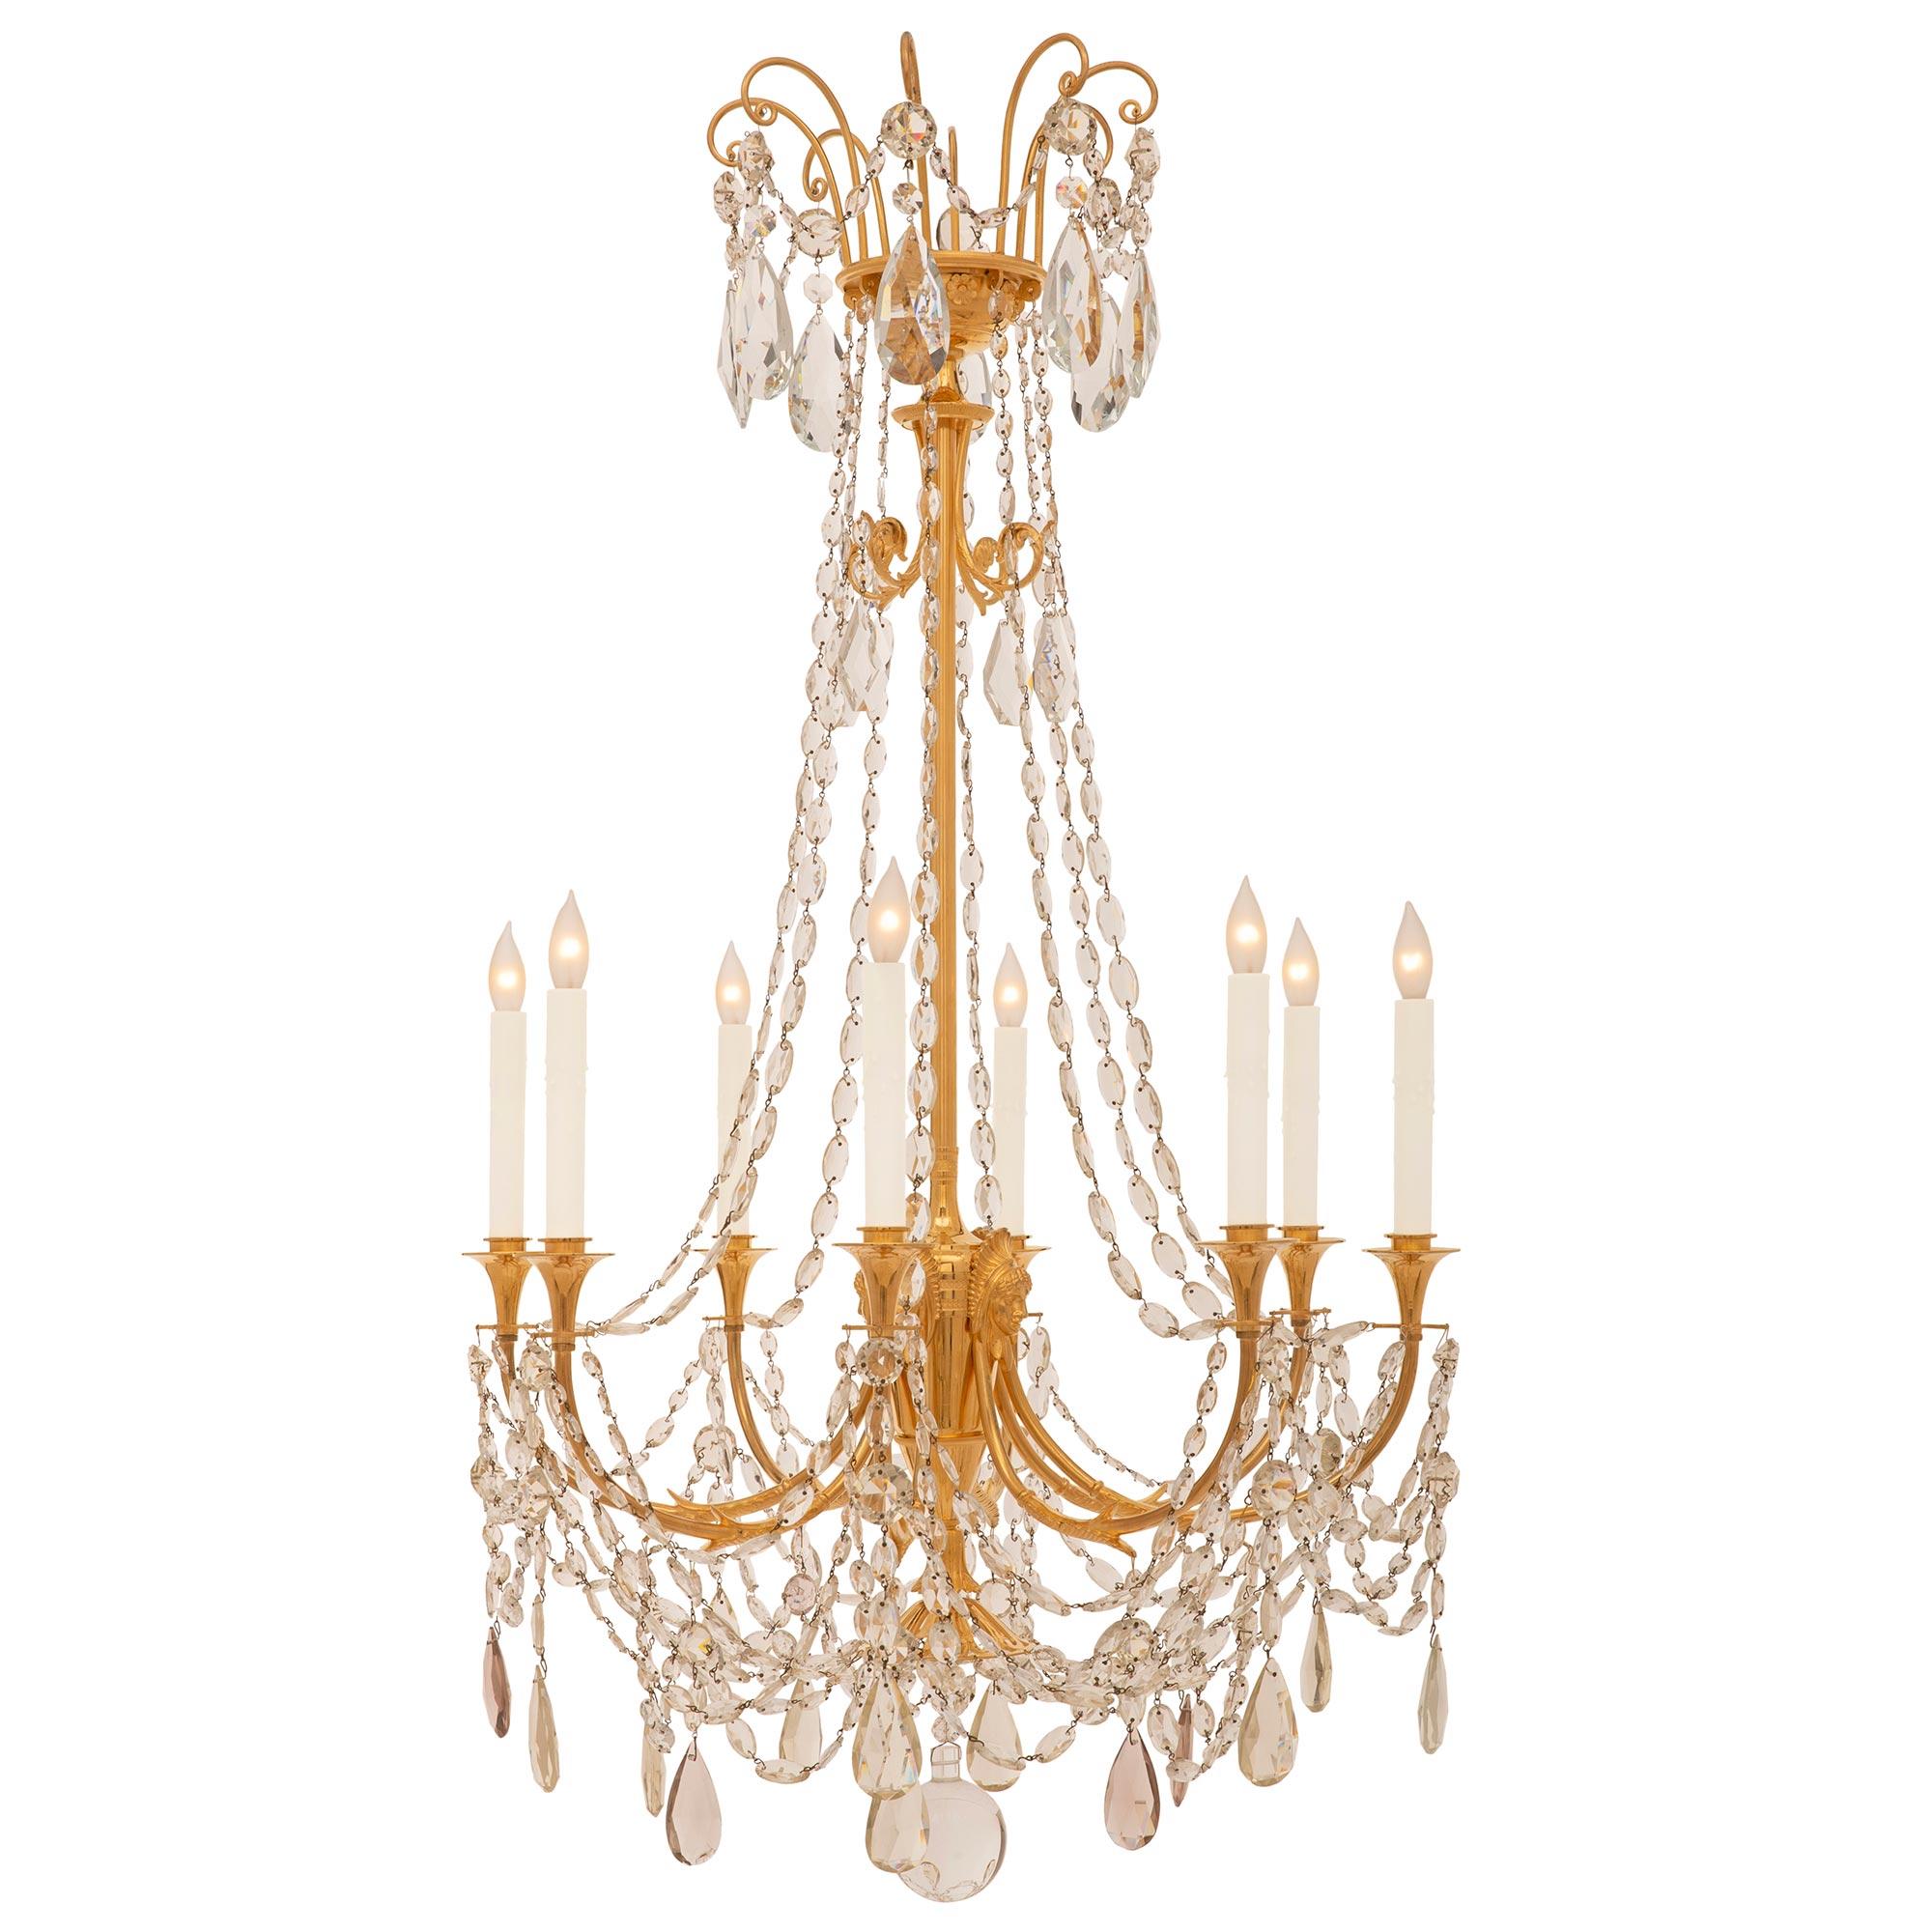 A stunning and extremely elegant French 19th century Empire st. ormolu and Baccarat crystal chandelier. The eight arm chandelier is centered by a striking solid crystal ball below a wonderful array of kite shaped crystal pendants and lovely most